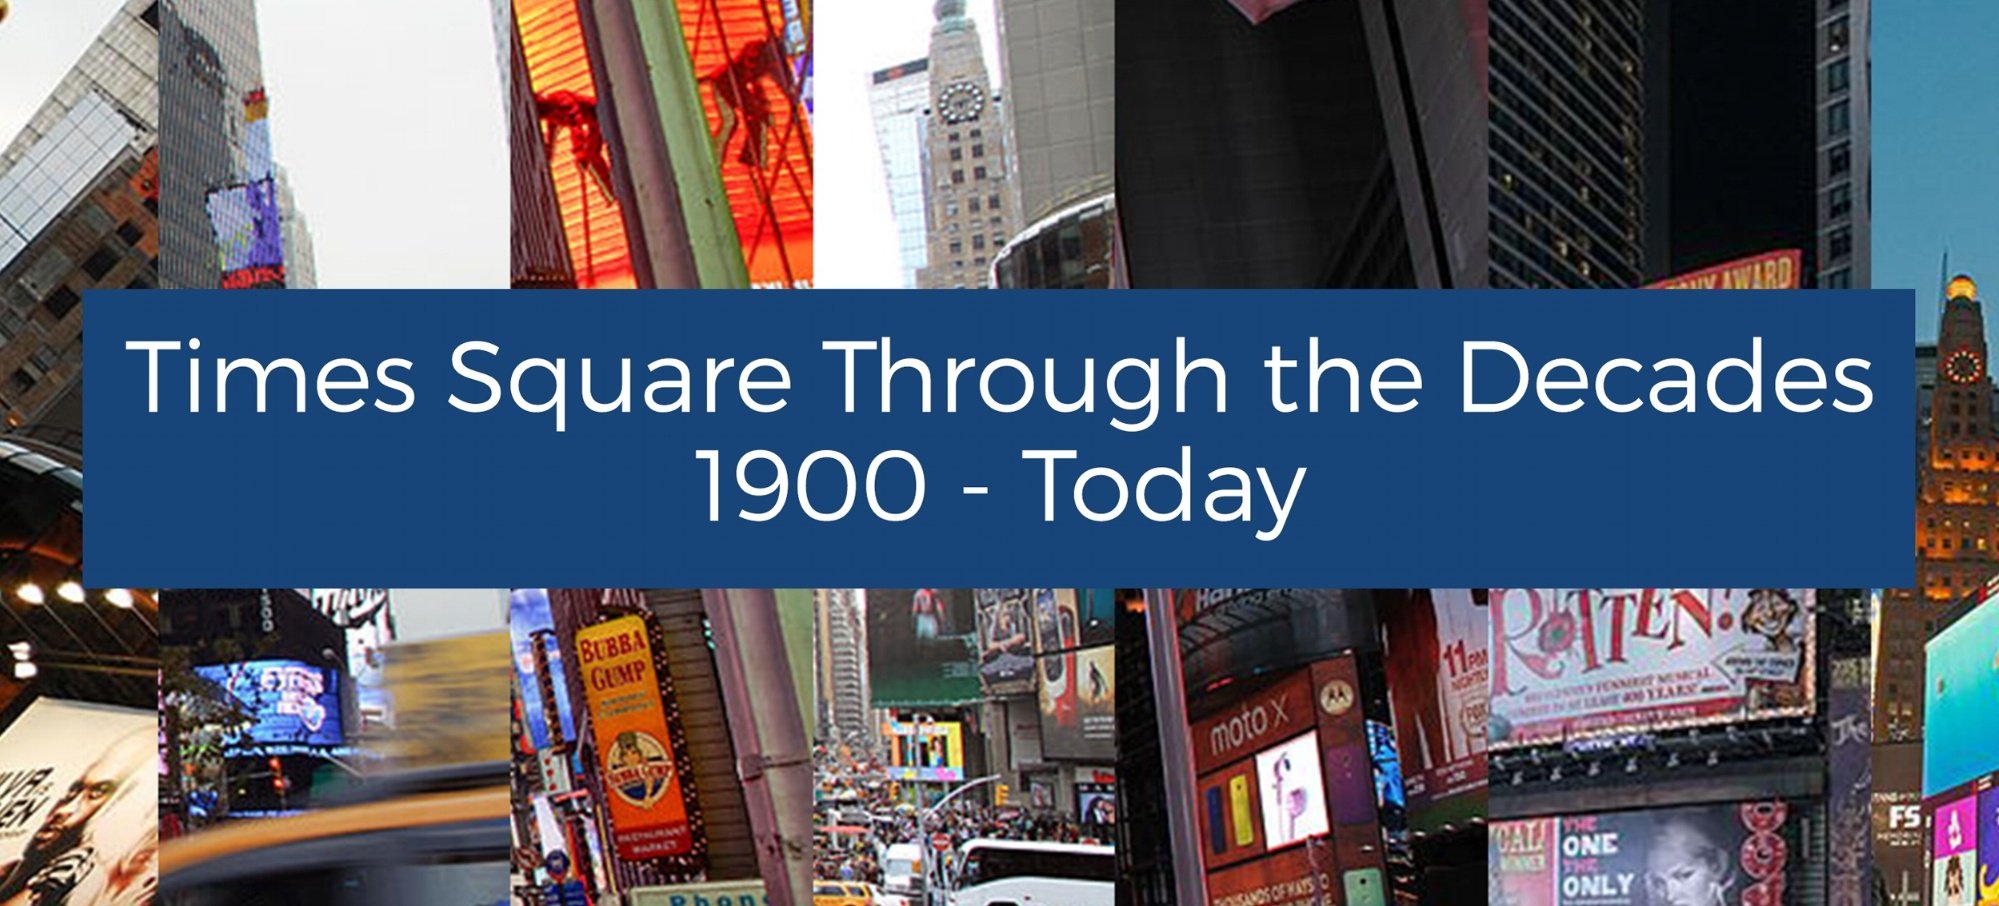 Times Square Through the Decades